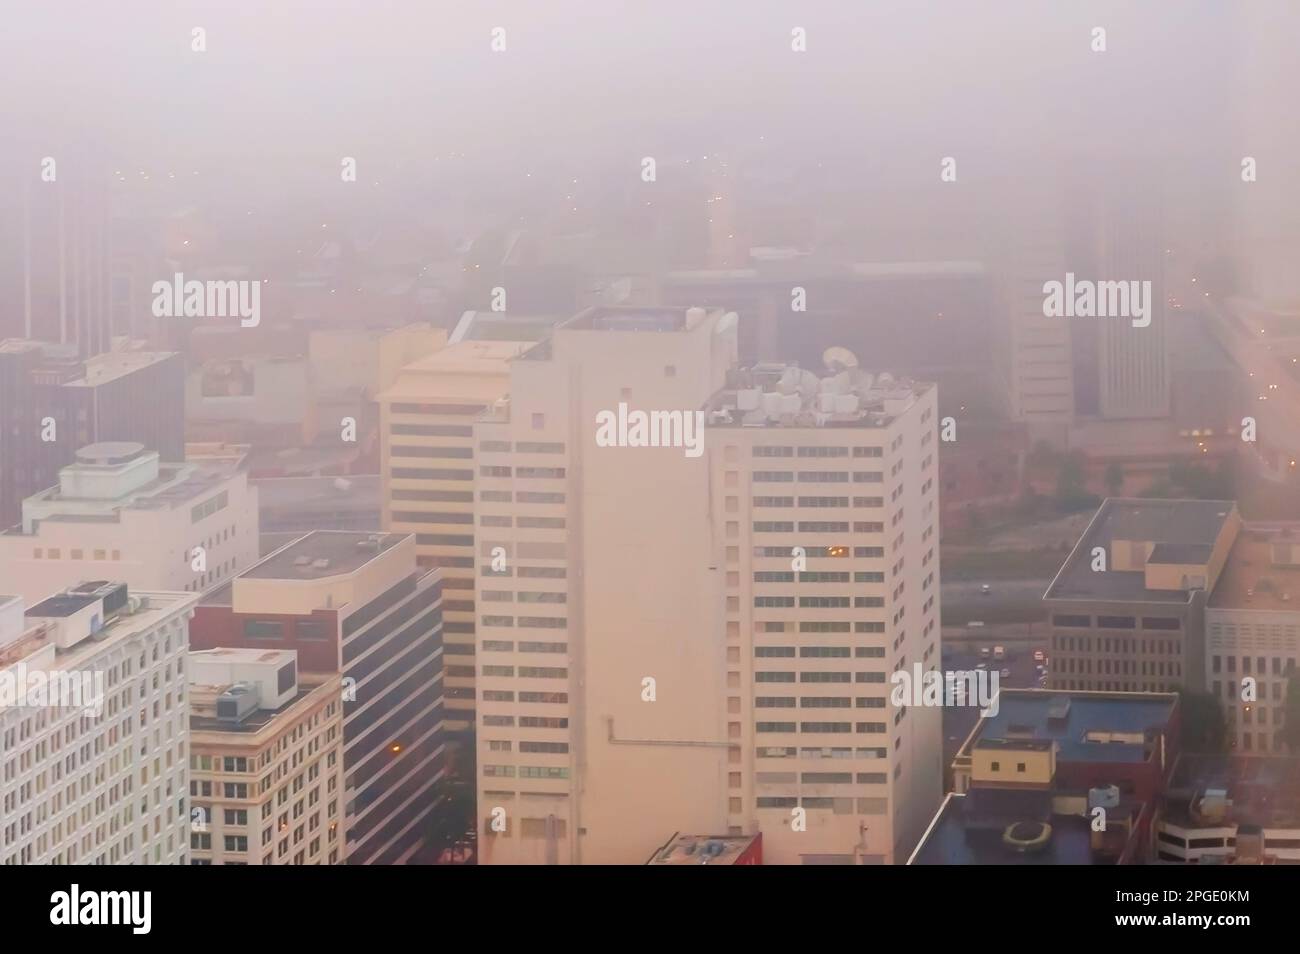 High rises in downtown Atlanta, Georgia, USA, covered in early morning fog on a spring morning, as seen from the Westin Peachtree Plaza Hotel. Stock Photo